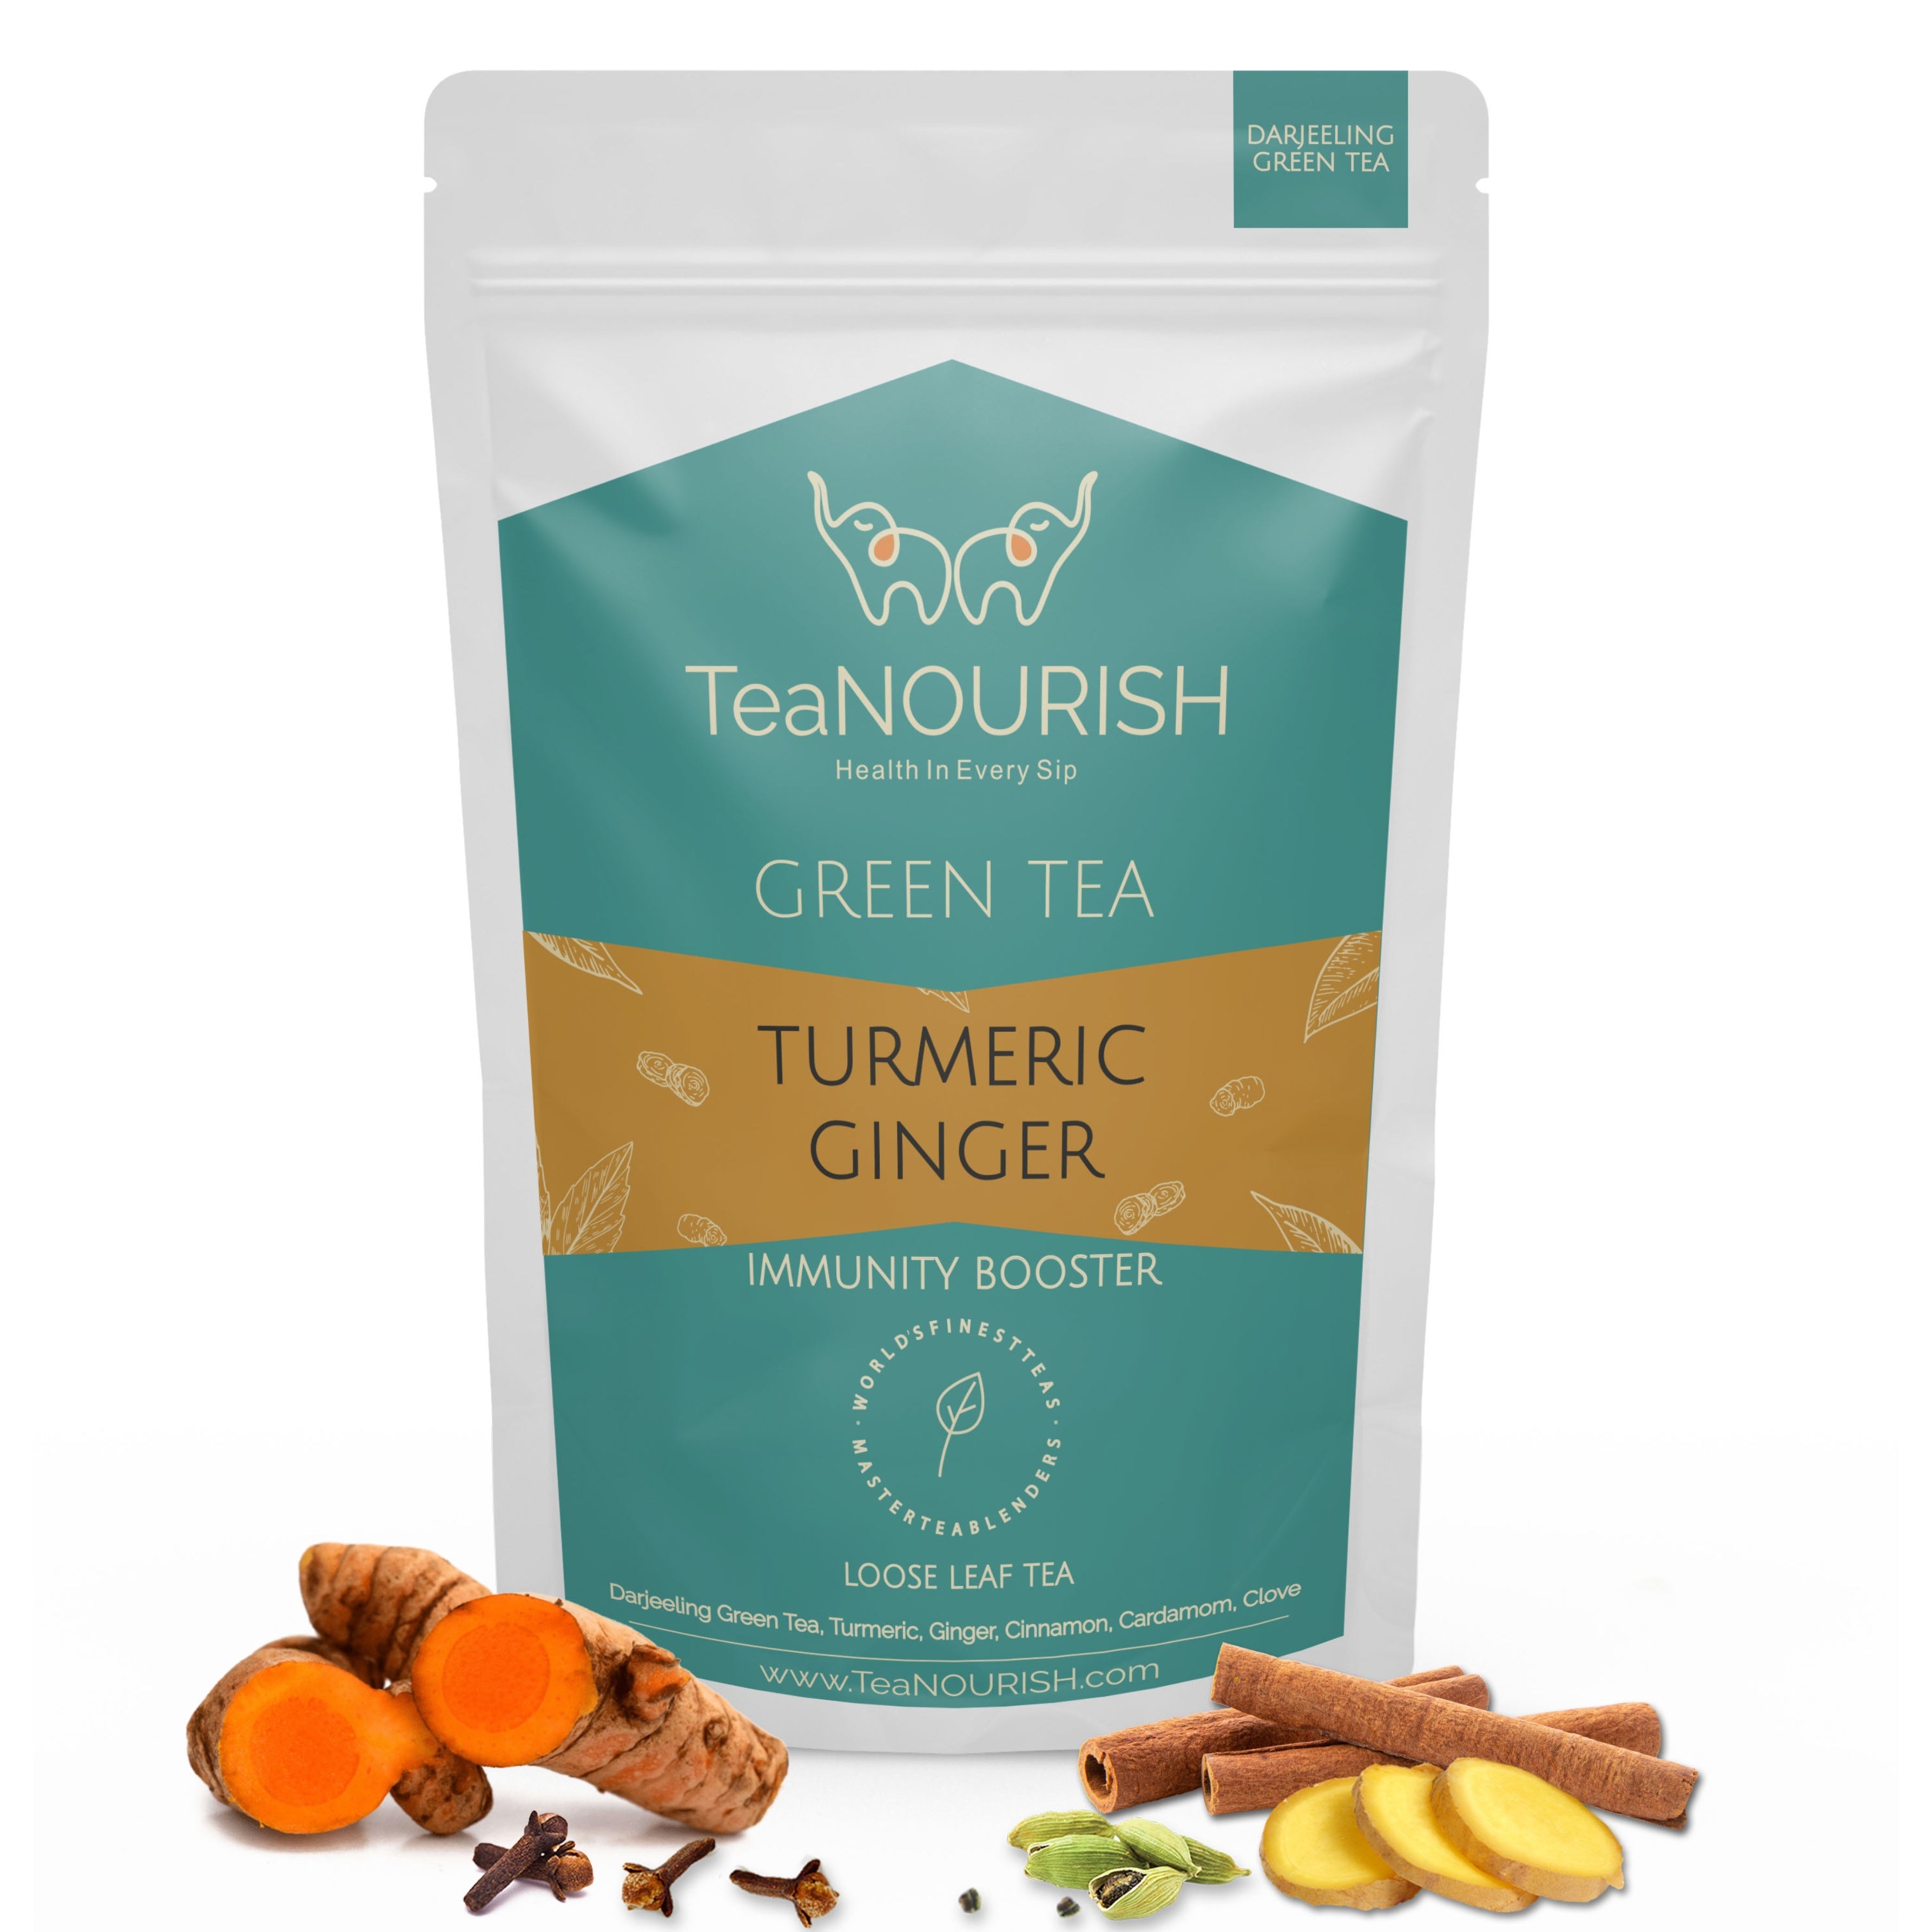 Turmeric Ginger Green Tea Product Picture